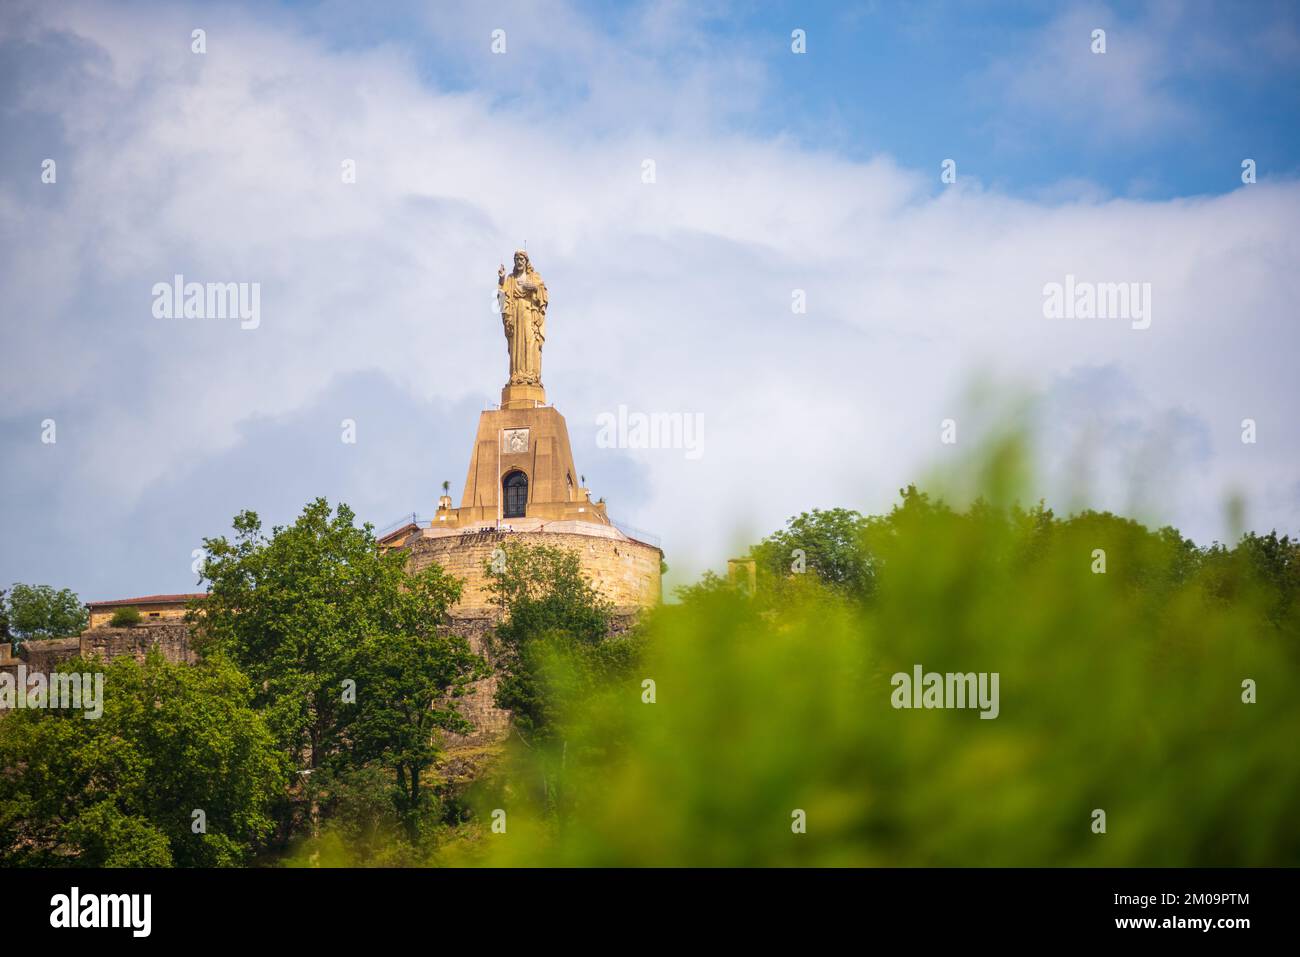 View of a statue from a fortress Stock Photo